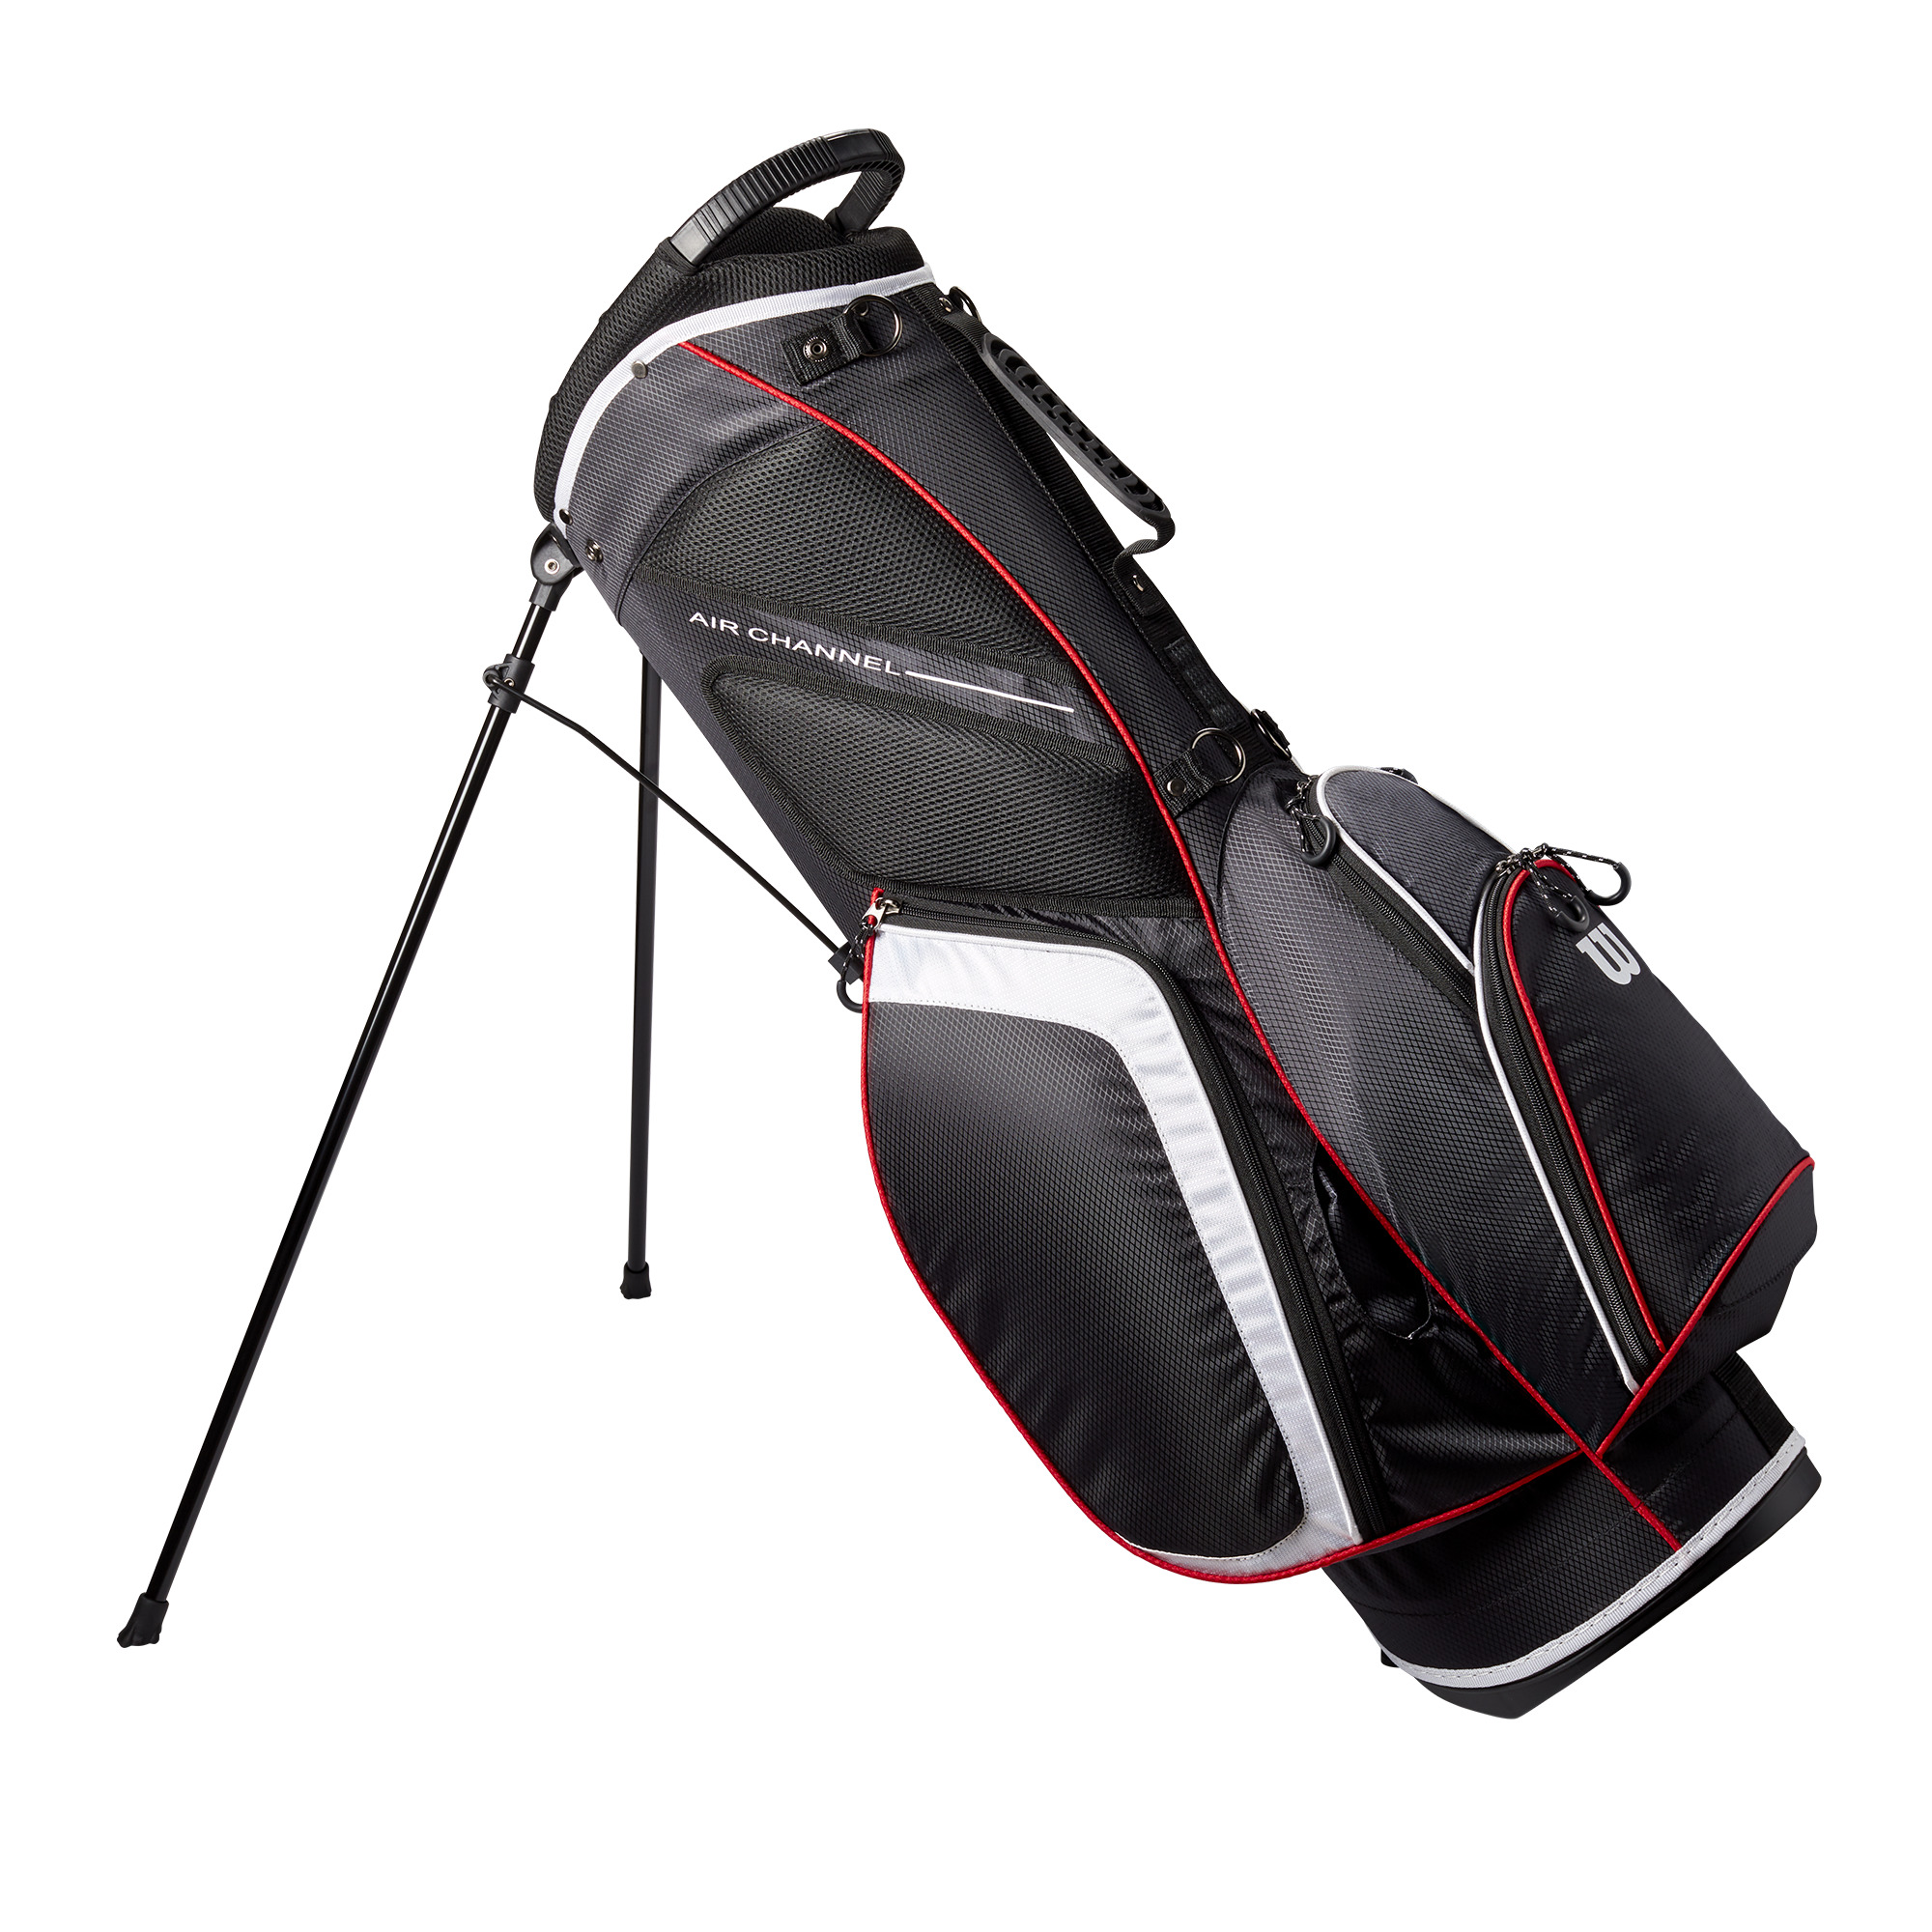 Wilson Stand Golf Bag, 6 Way Divider, Black/White/Red - image 3 of 6